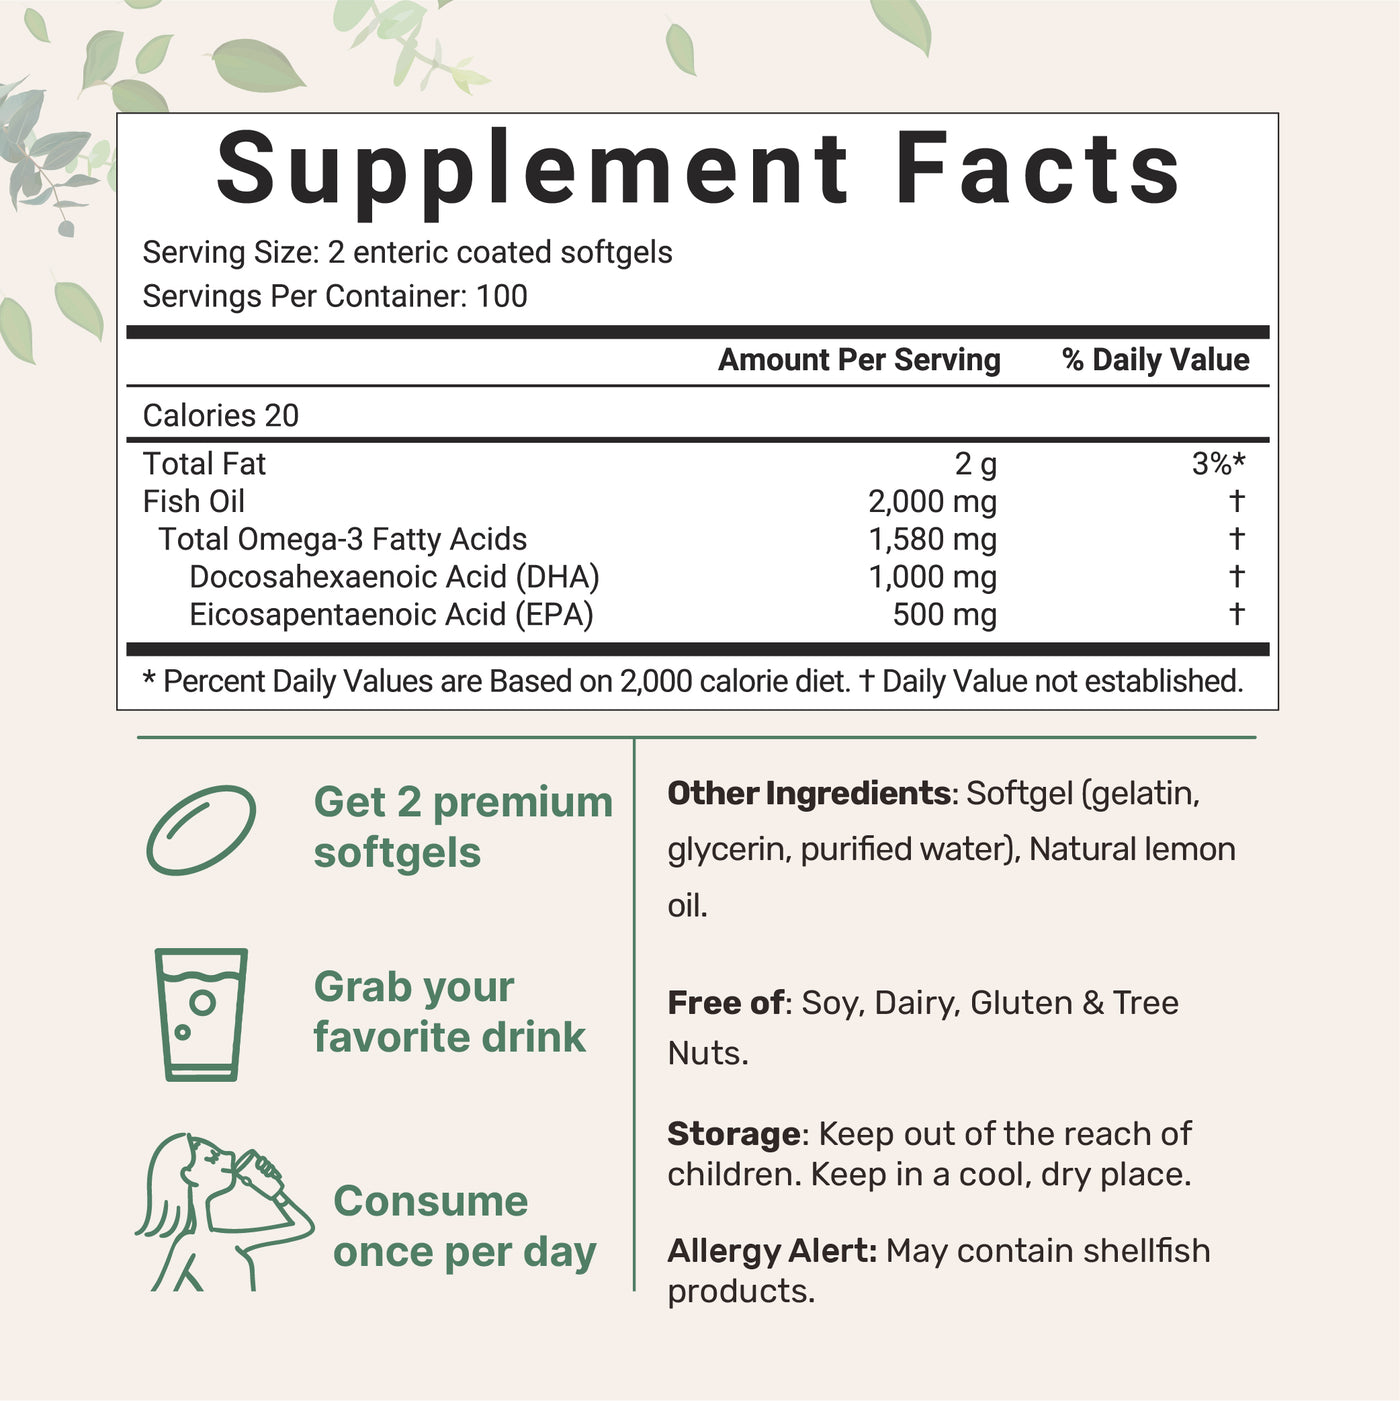 Omega 3 Fish Oil DHA Supplements 1000mg with EPA 500mg Supplement Facts